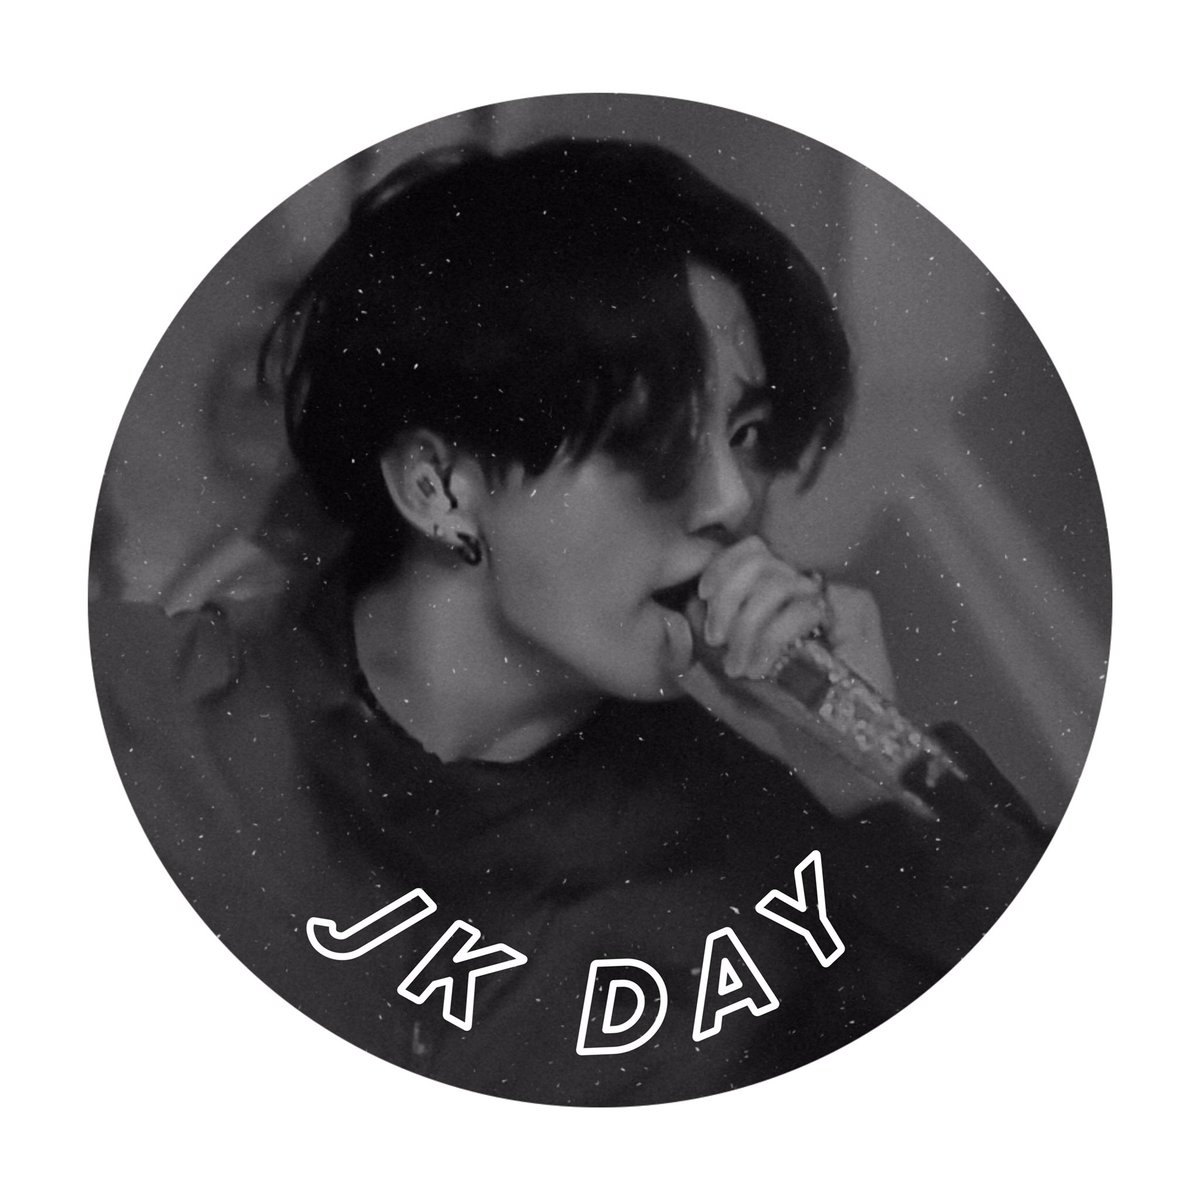 layouts for jungkook's birthday 